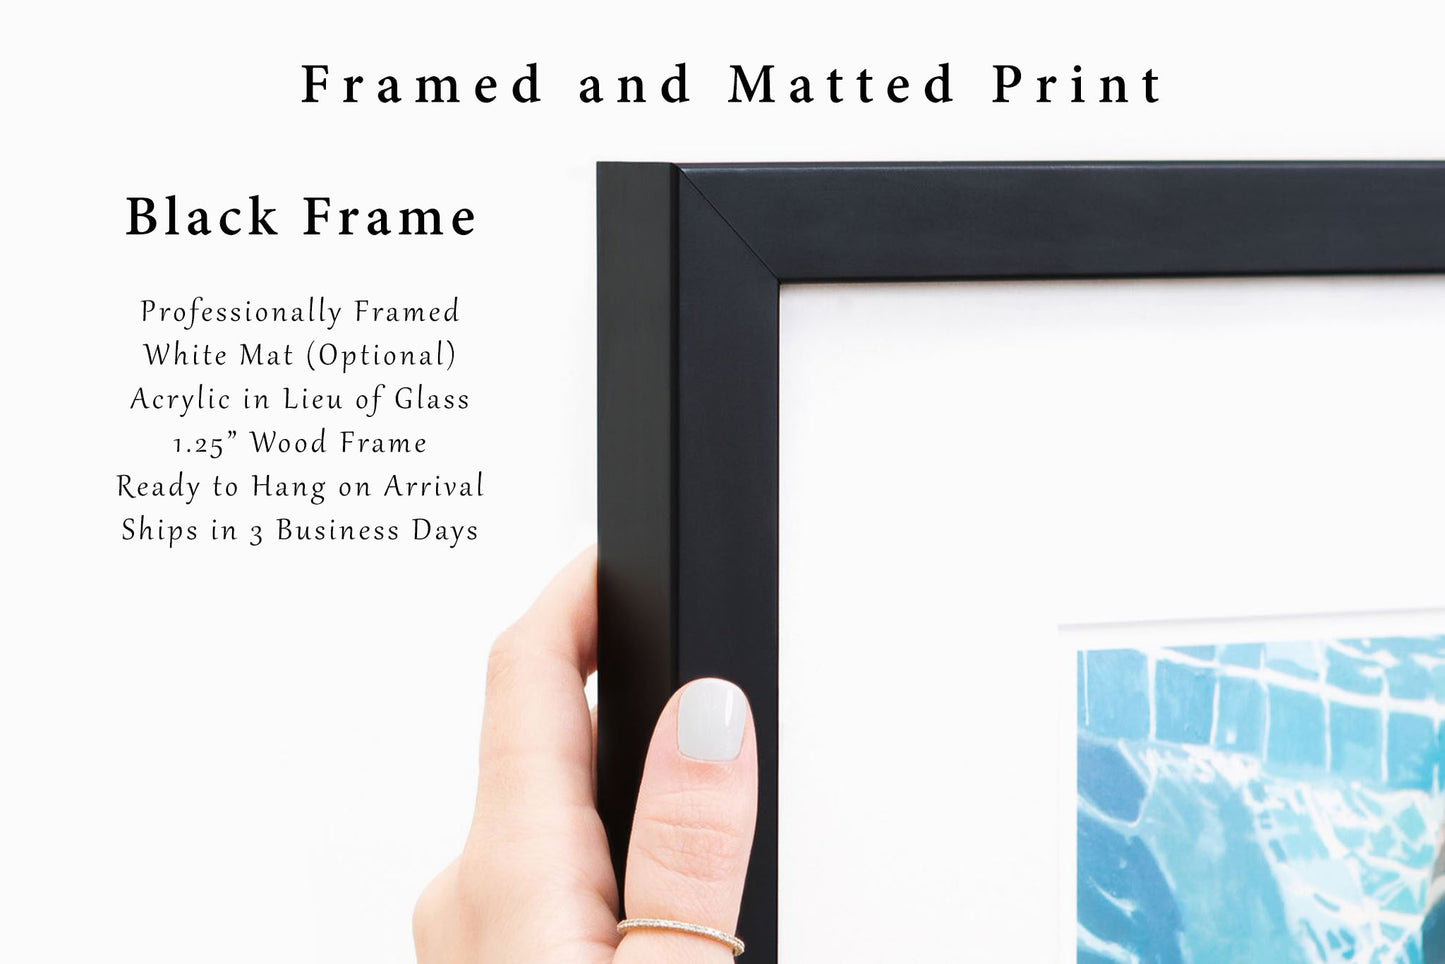 Framed Print - Frame and Mat Any Photo In My Shop